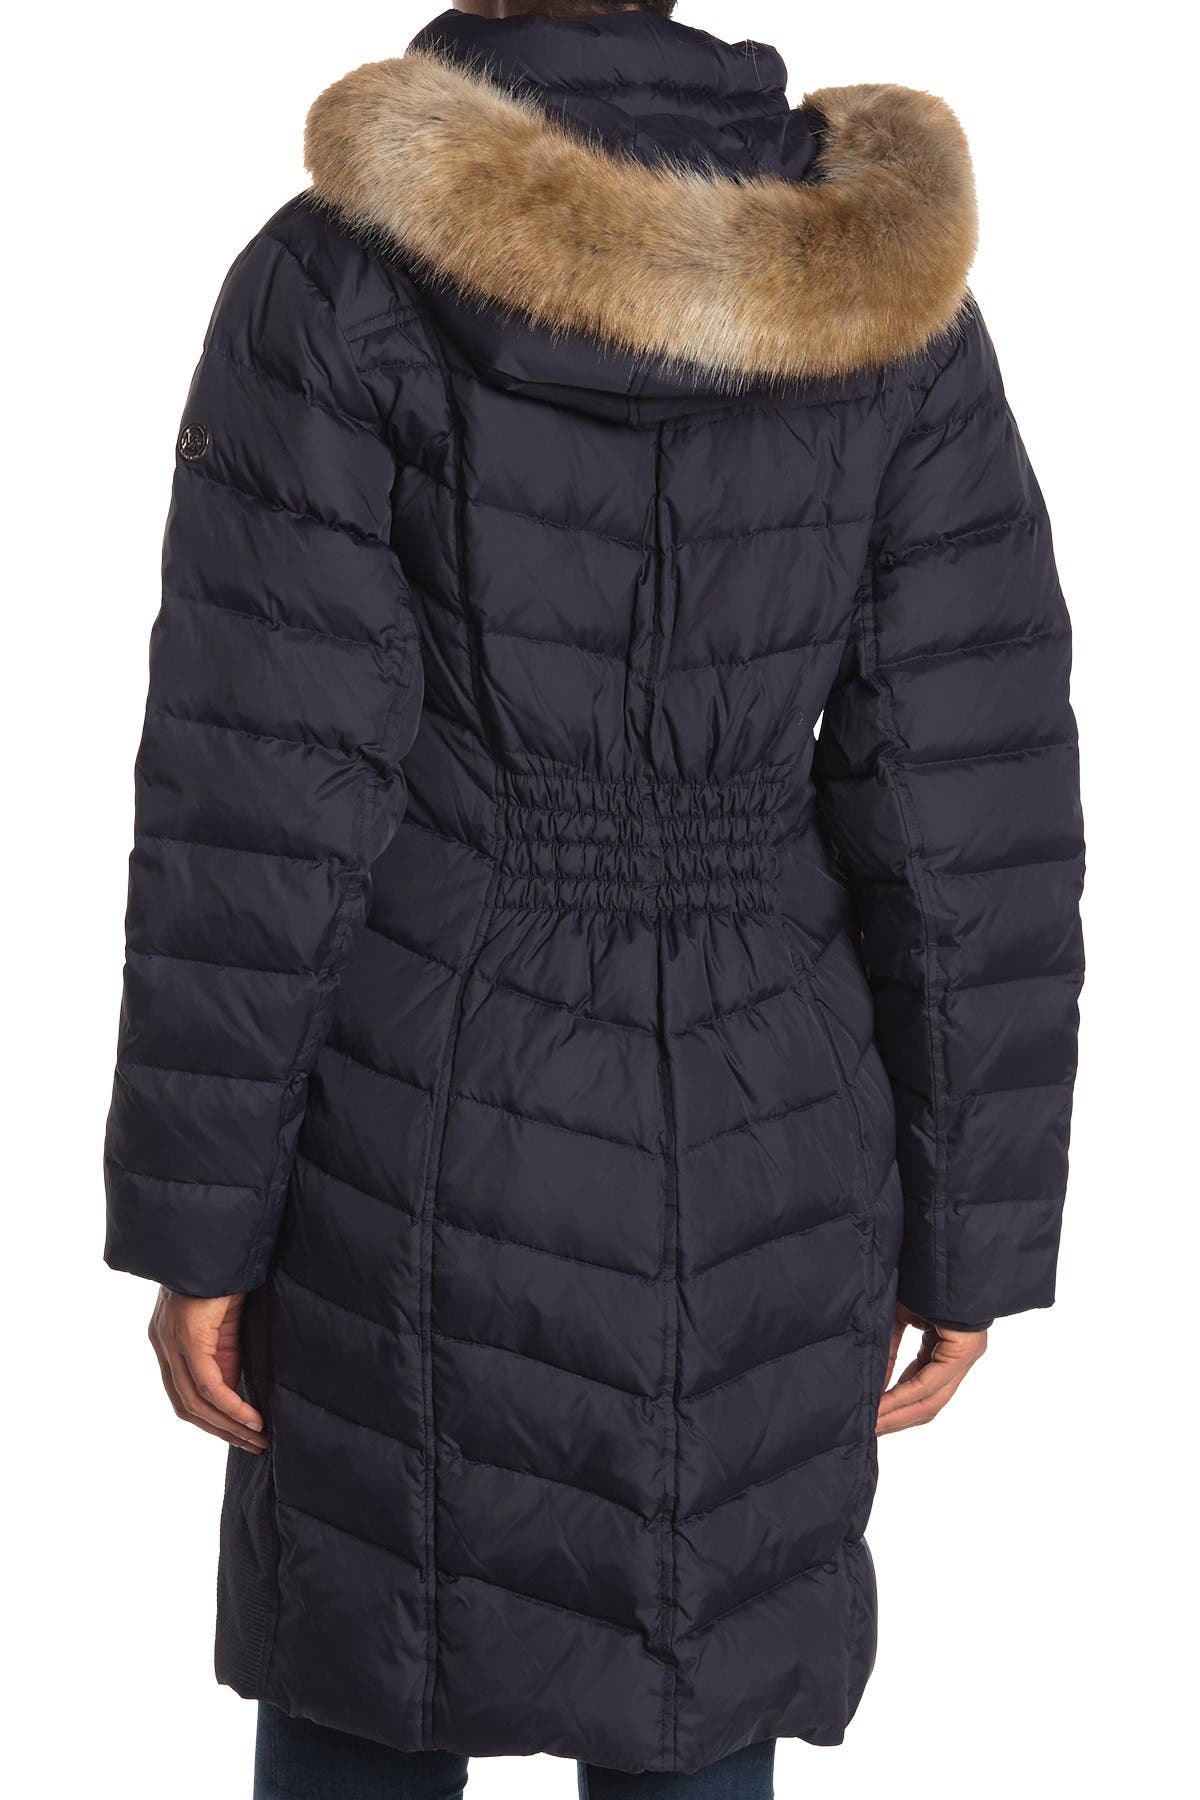 michael kors quilted parka